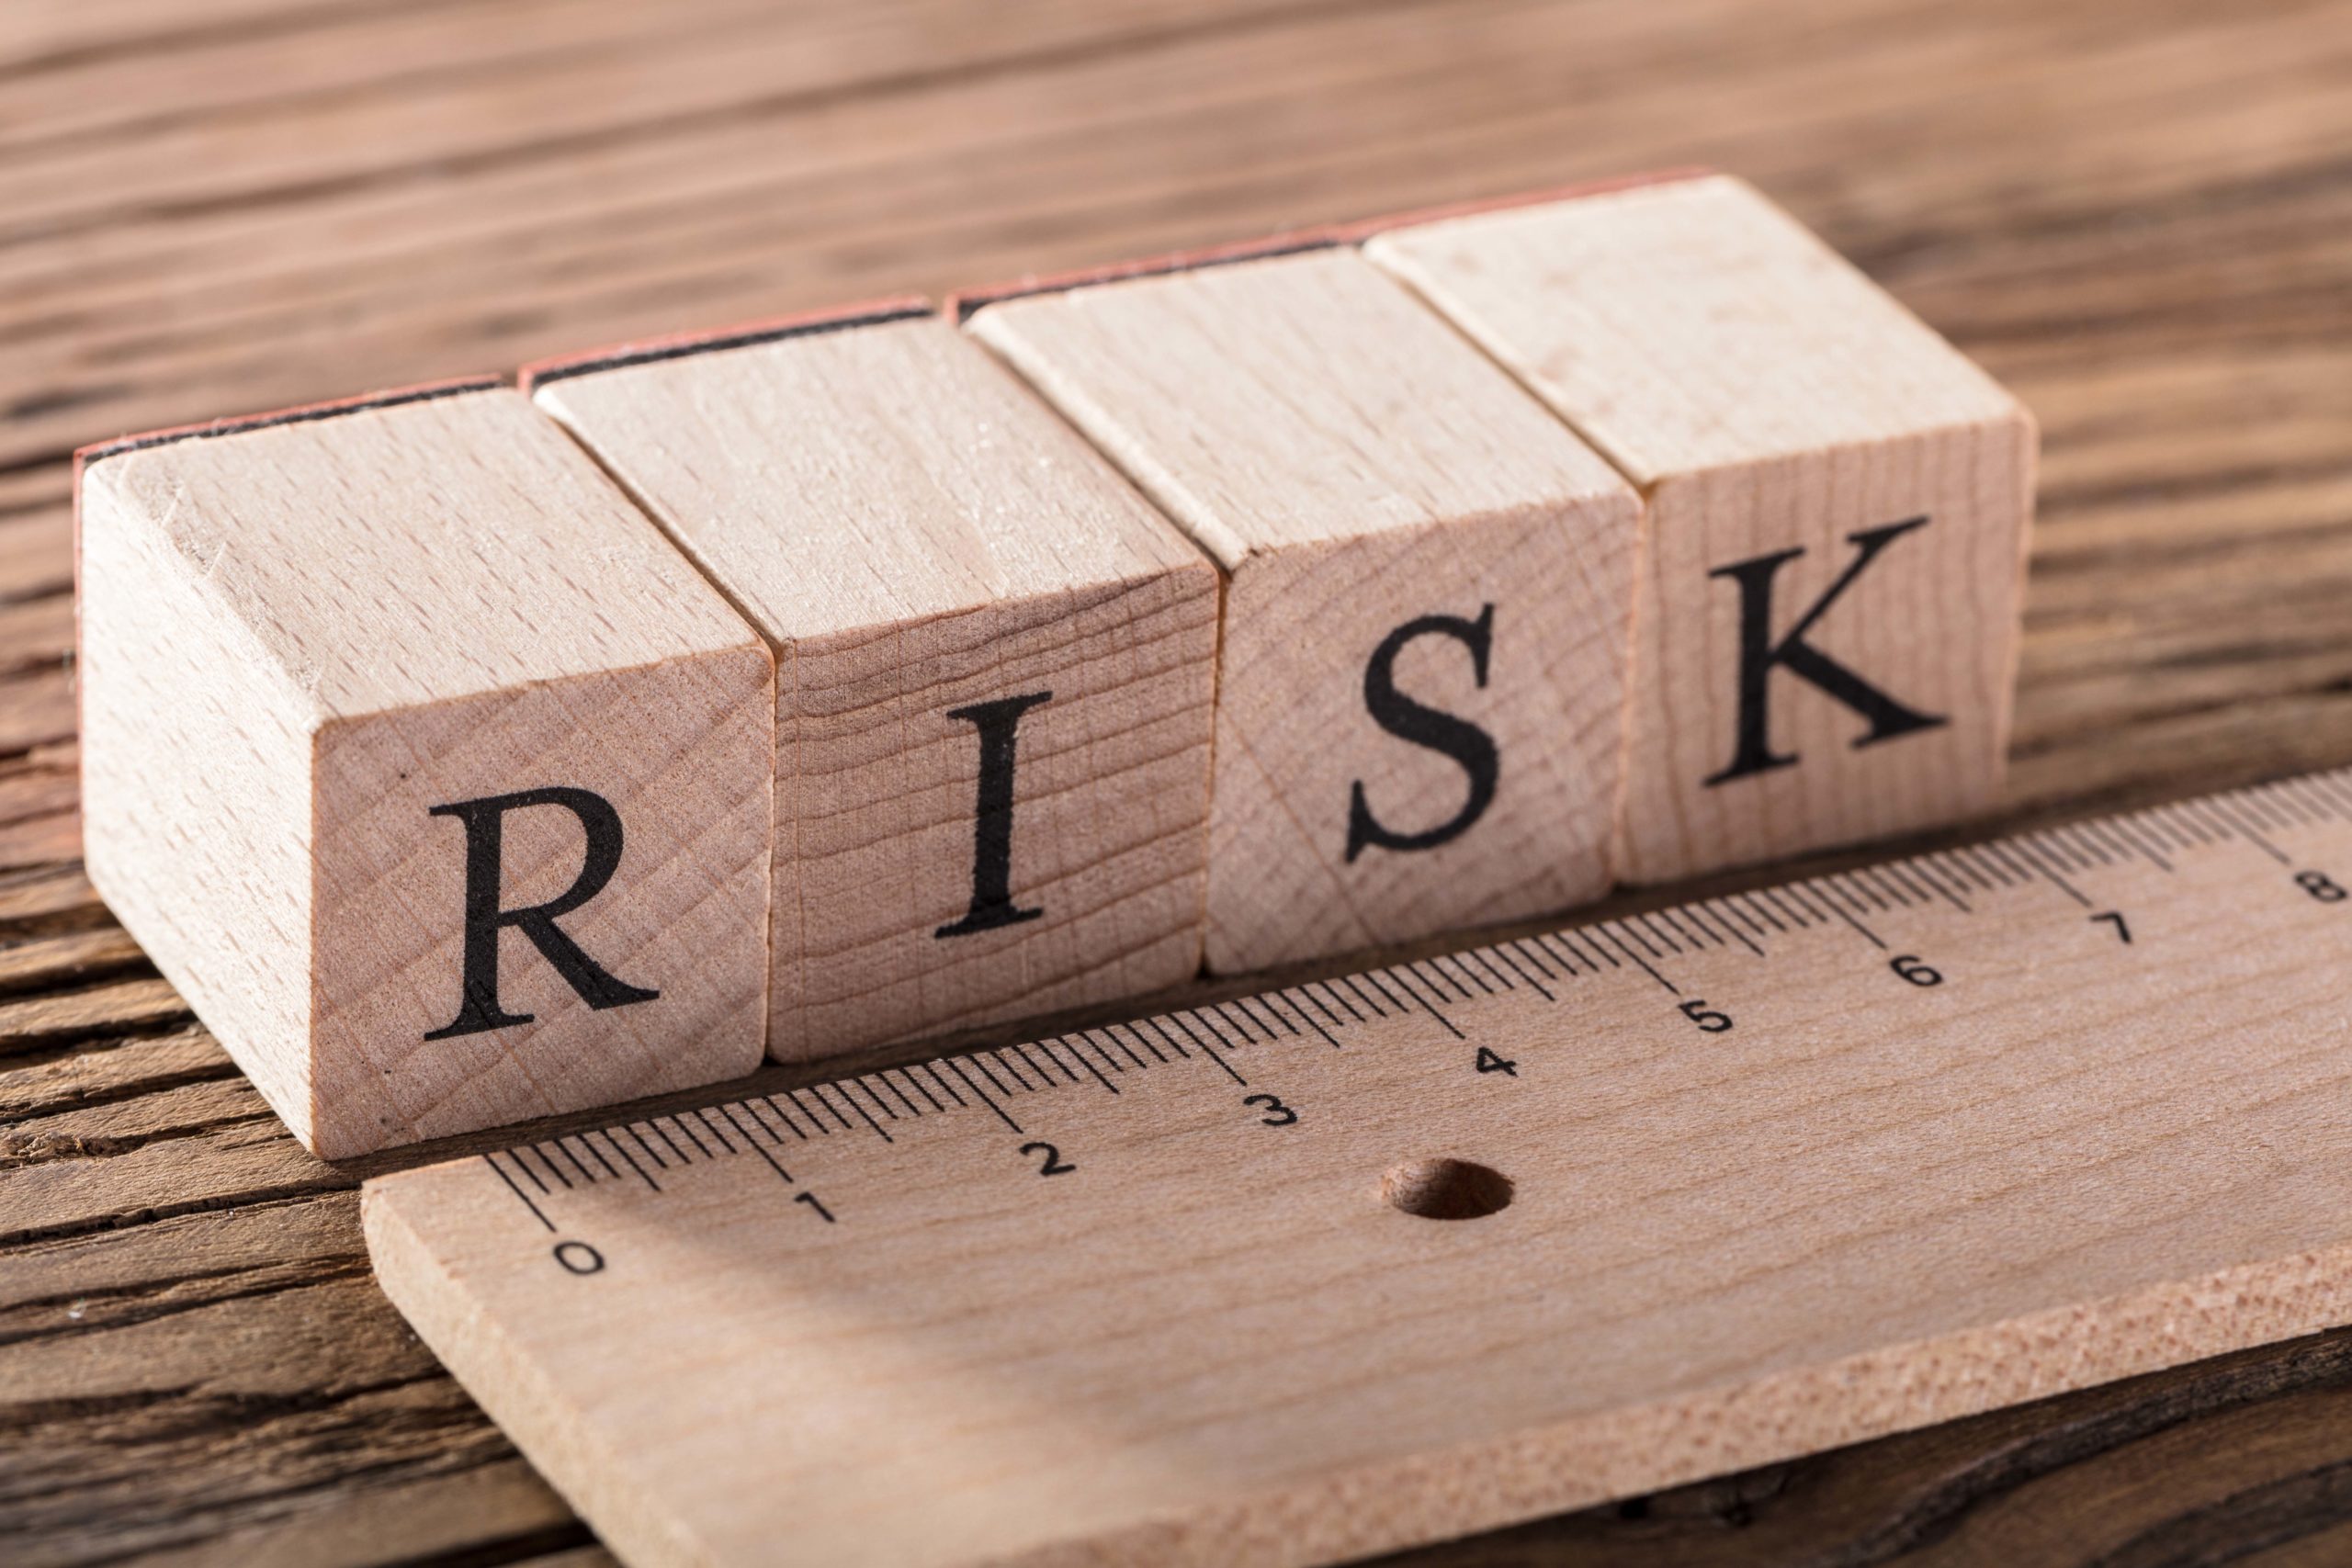 Risk Word On Blocks Arranged Behind The Ruler On Wooden Table